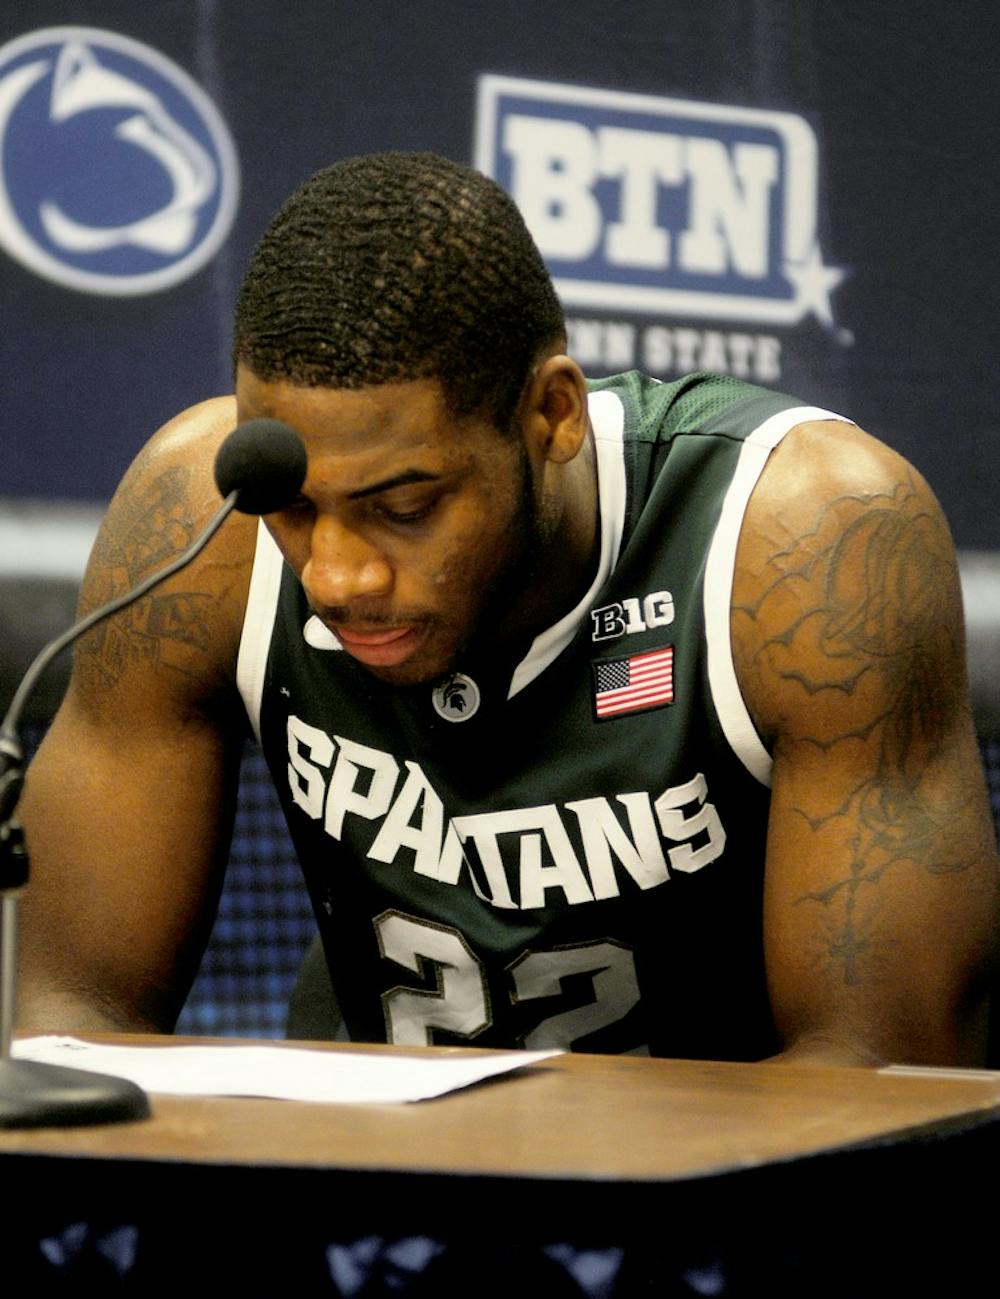 	<p>Sophomore Guard Branden Dawson looks down somberly during a post game press conference after being involved in a brawl with a fellow Michigan State player just hours before Wednesday&#8217;s game. Dawson and Adrien Payne, the other player involved, sat out the first half of the Spartans&#8217; 81-72 victory against Penn State. David Reiling/The Daily Collegian</p>